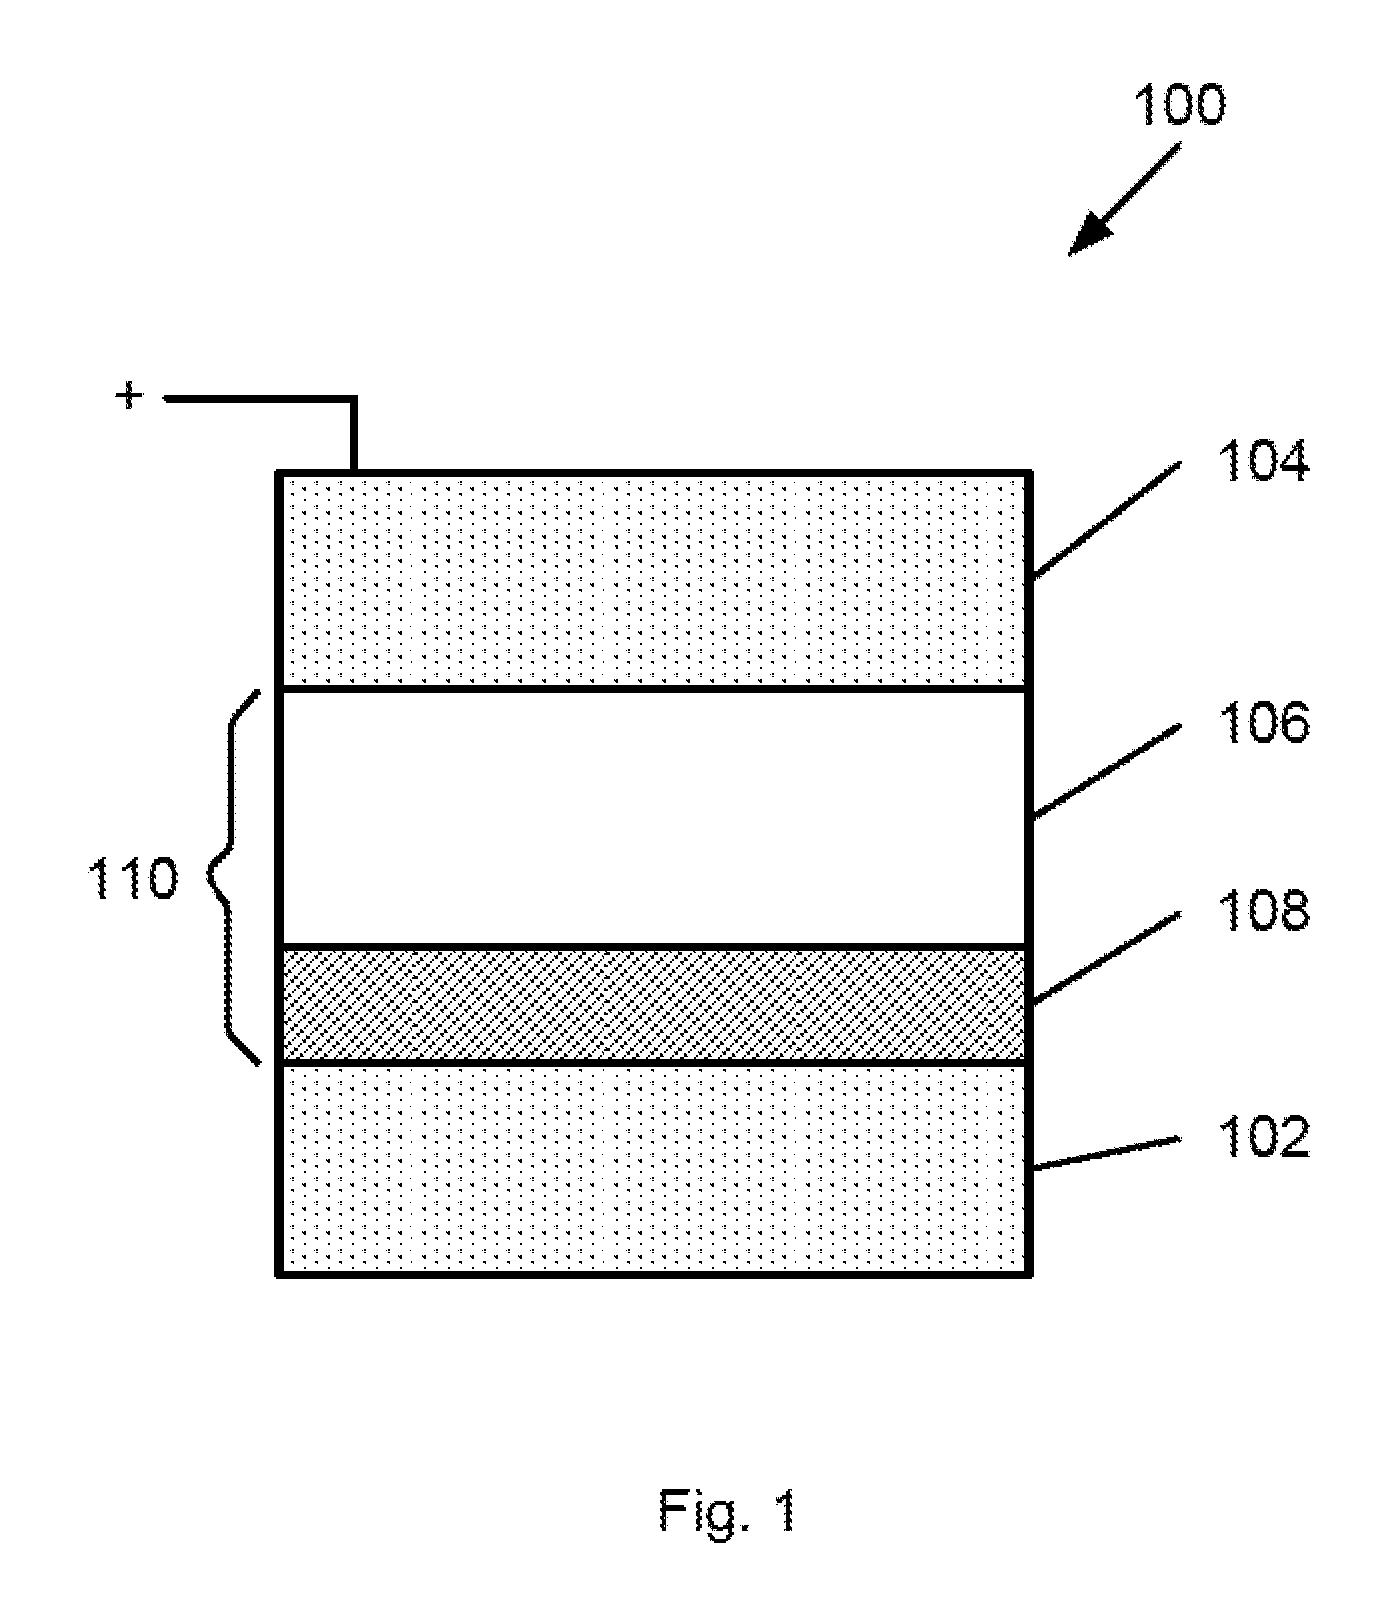 Hetero resistive switching material layer in RRAM device and method